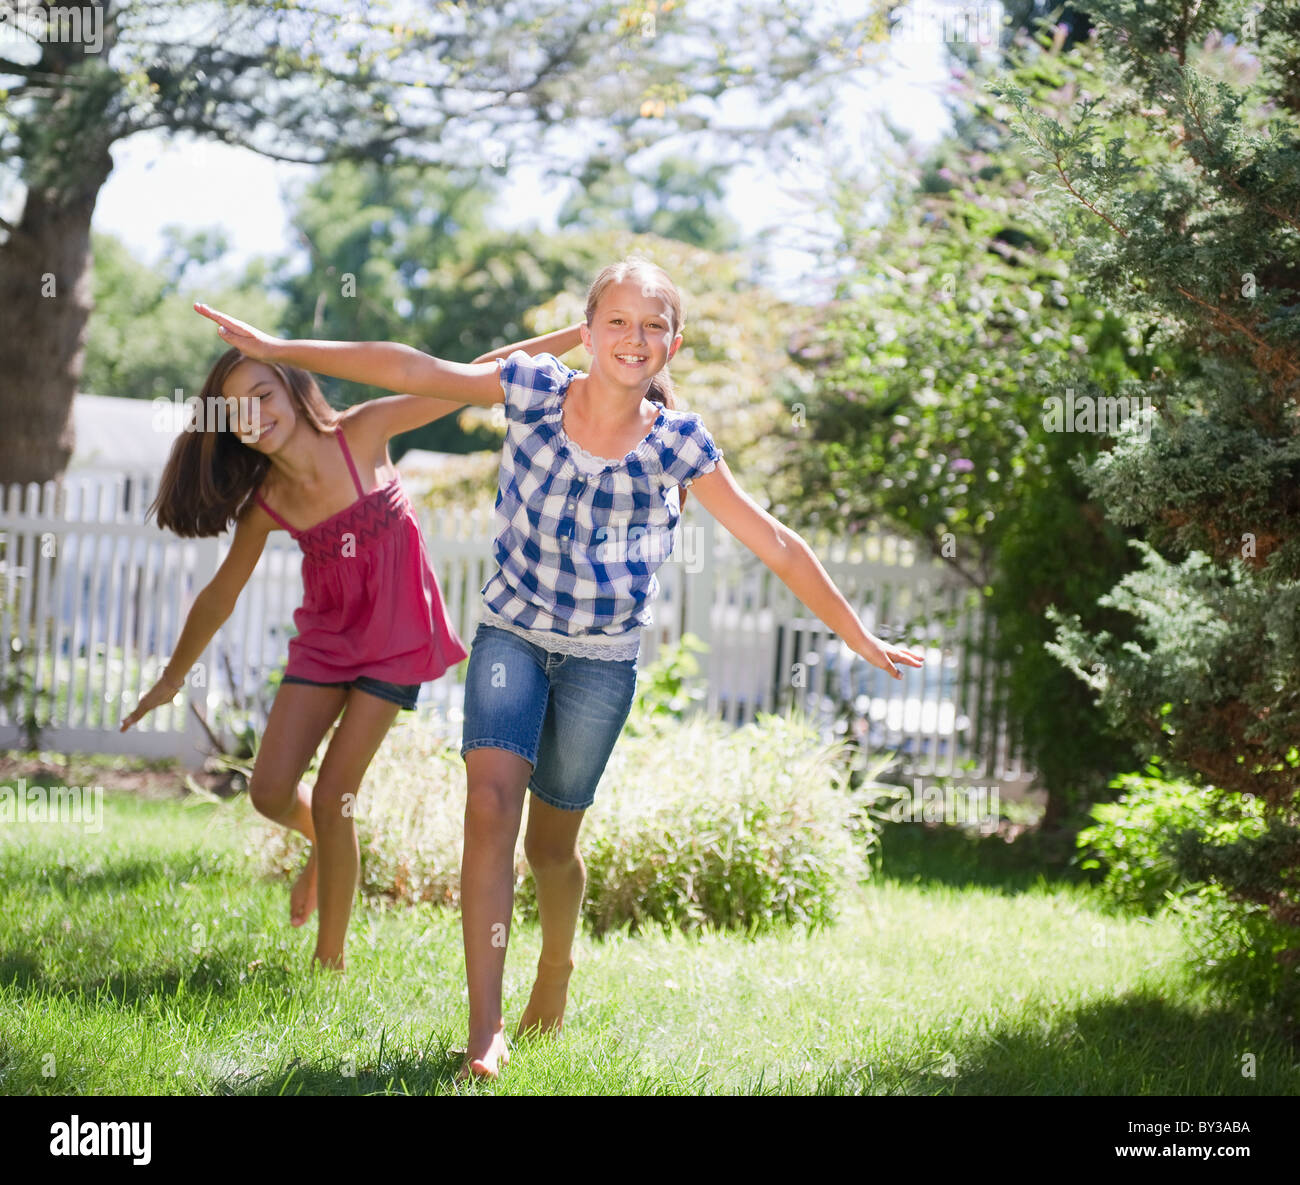 http://c8.alamy.com/comp/BY3ABA/usa-new-york-two-girls-10-11-10-11-playing-in-backyard-BY3ABA.jpg